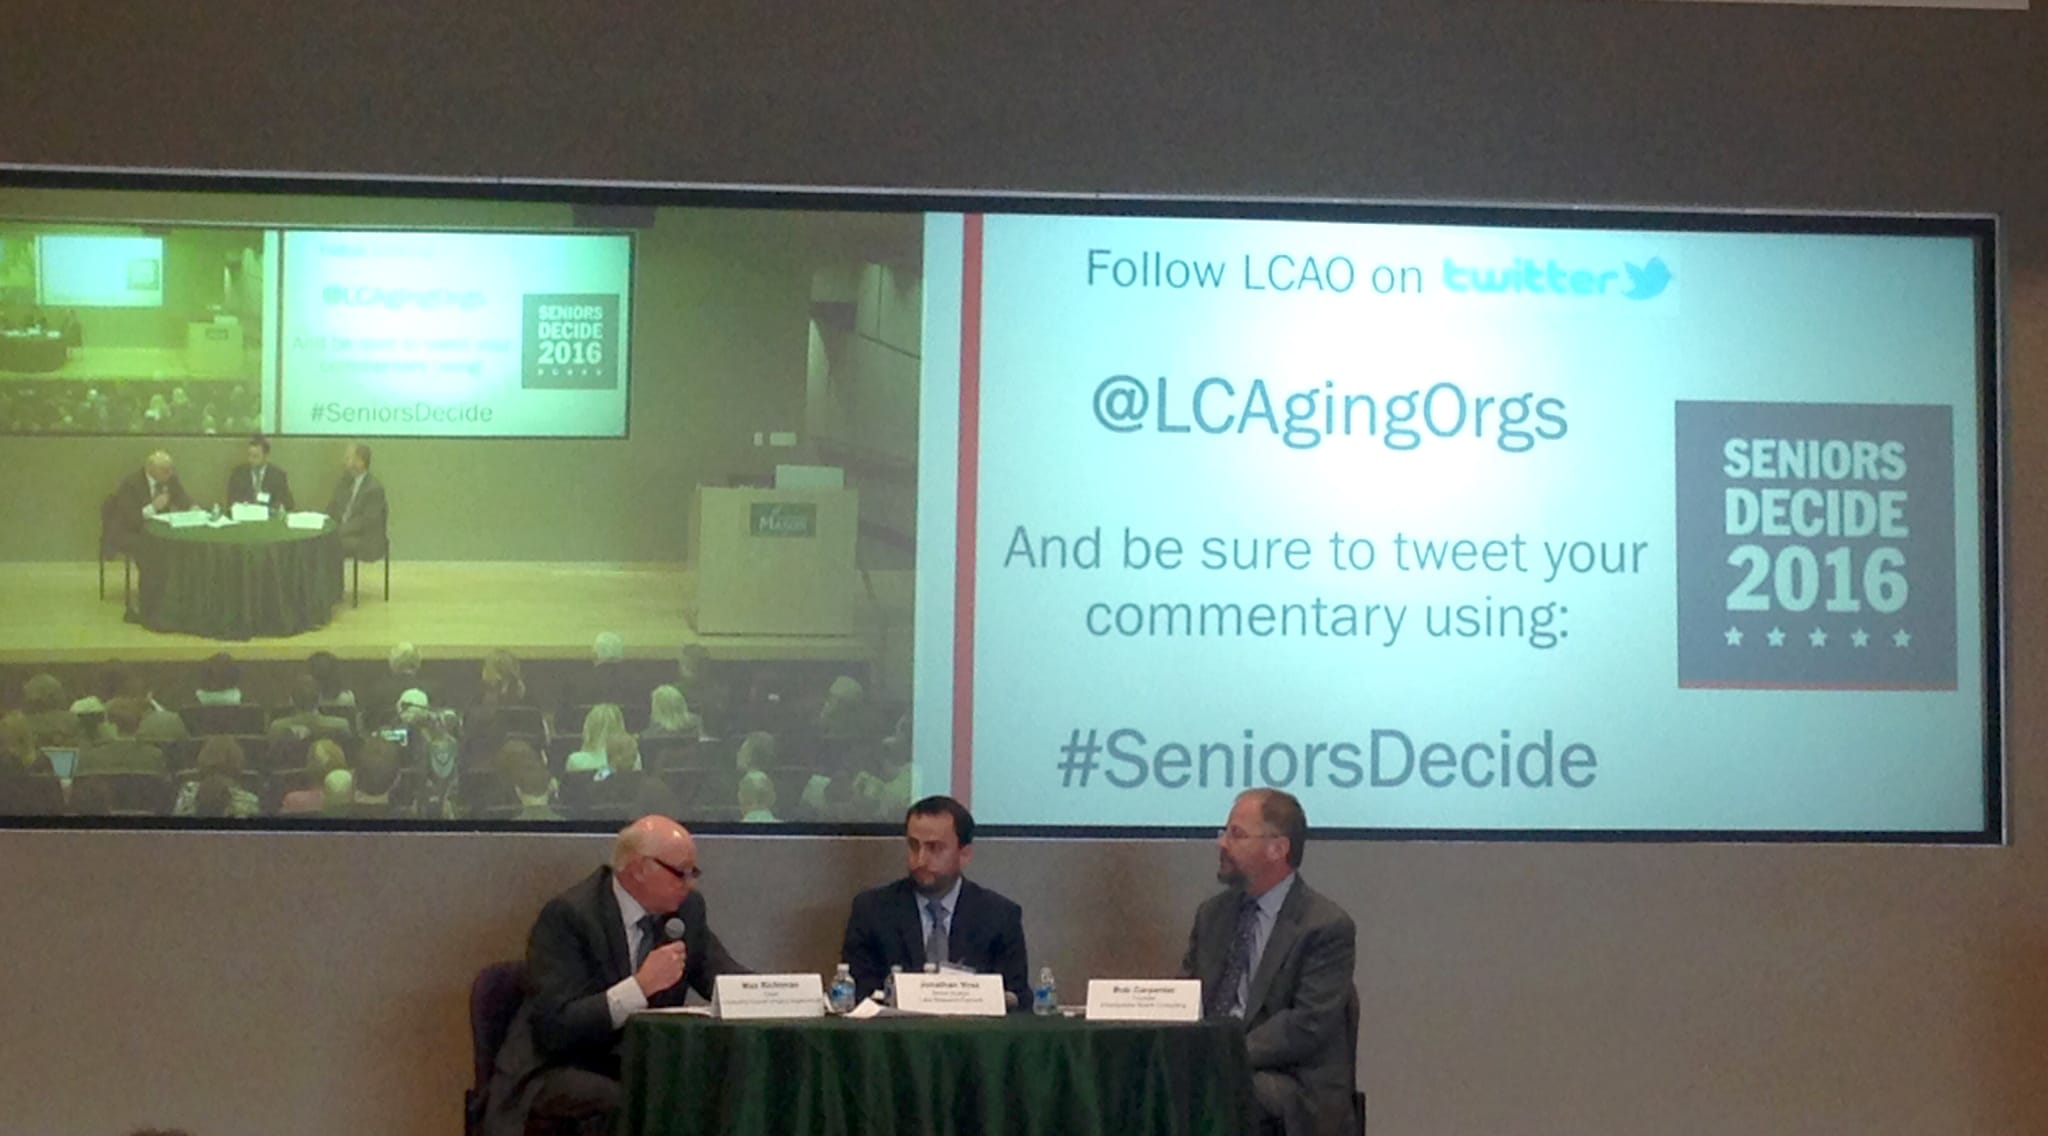 Seniors Decide Event Spotlights Issues Affecting Older Adults